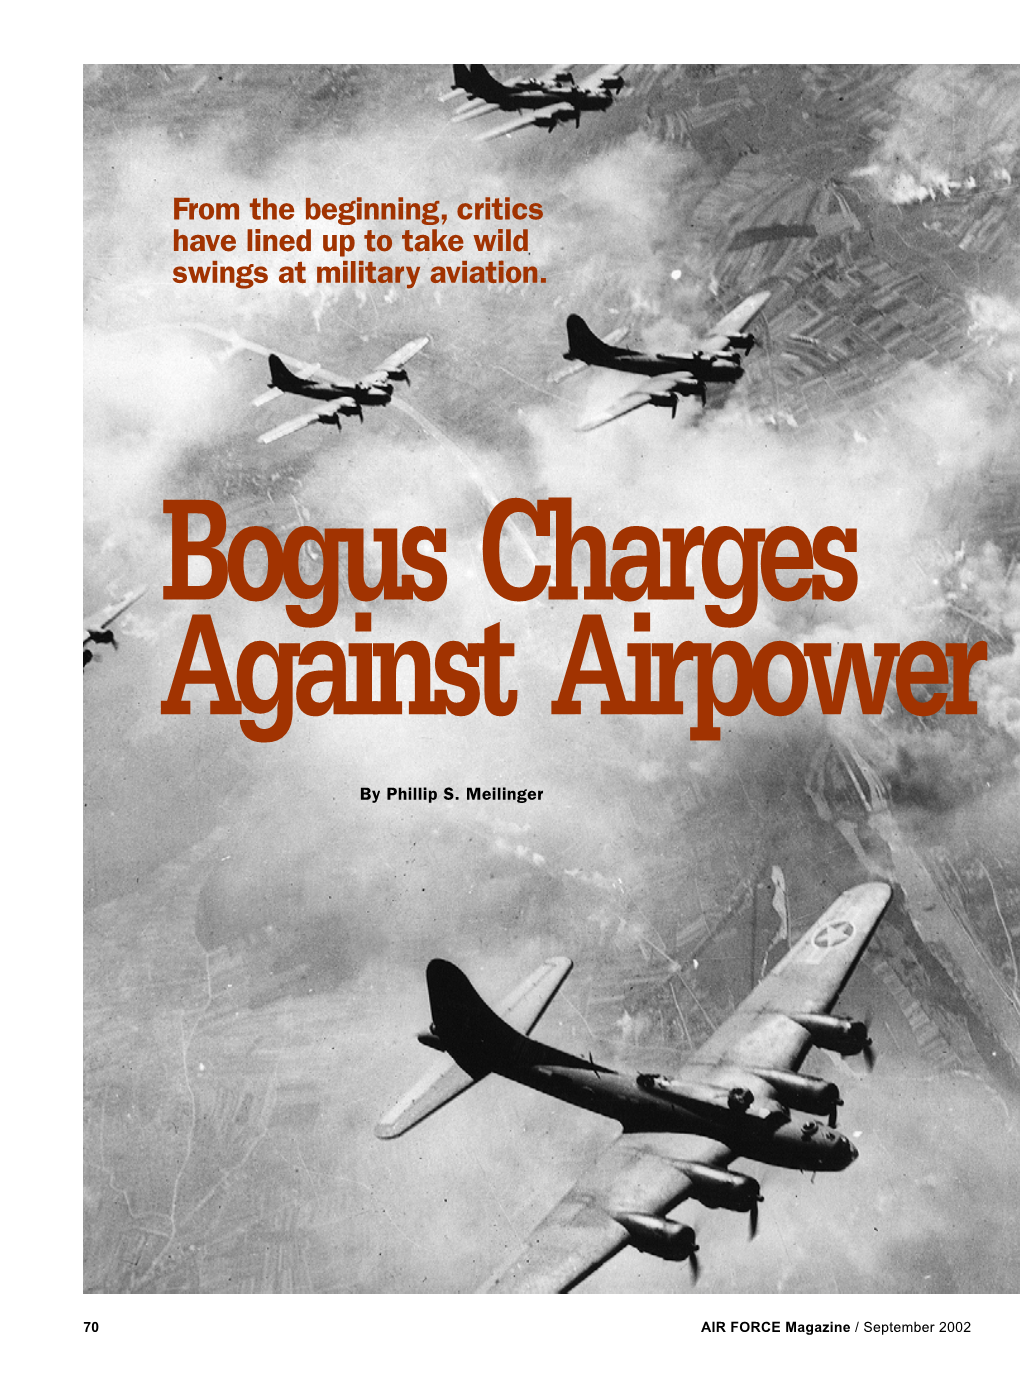 Bogus Charges Against Airpower